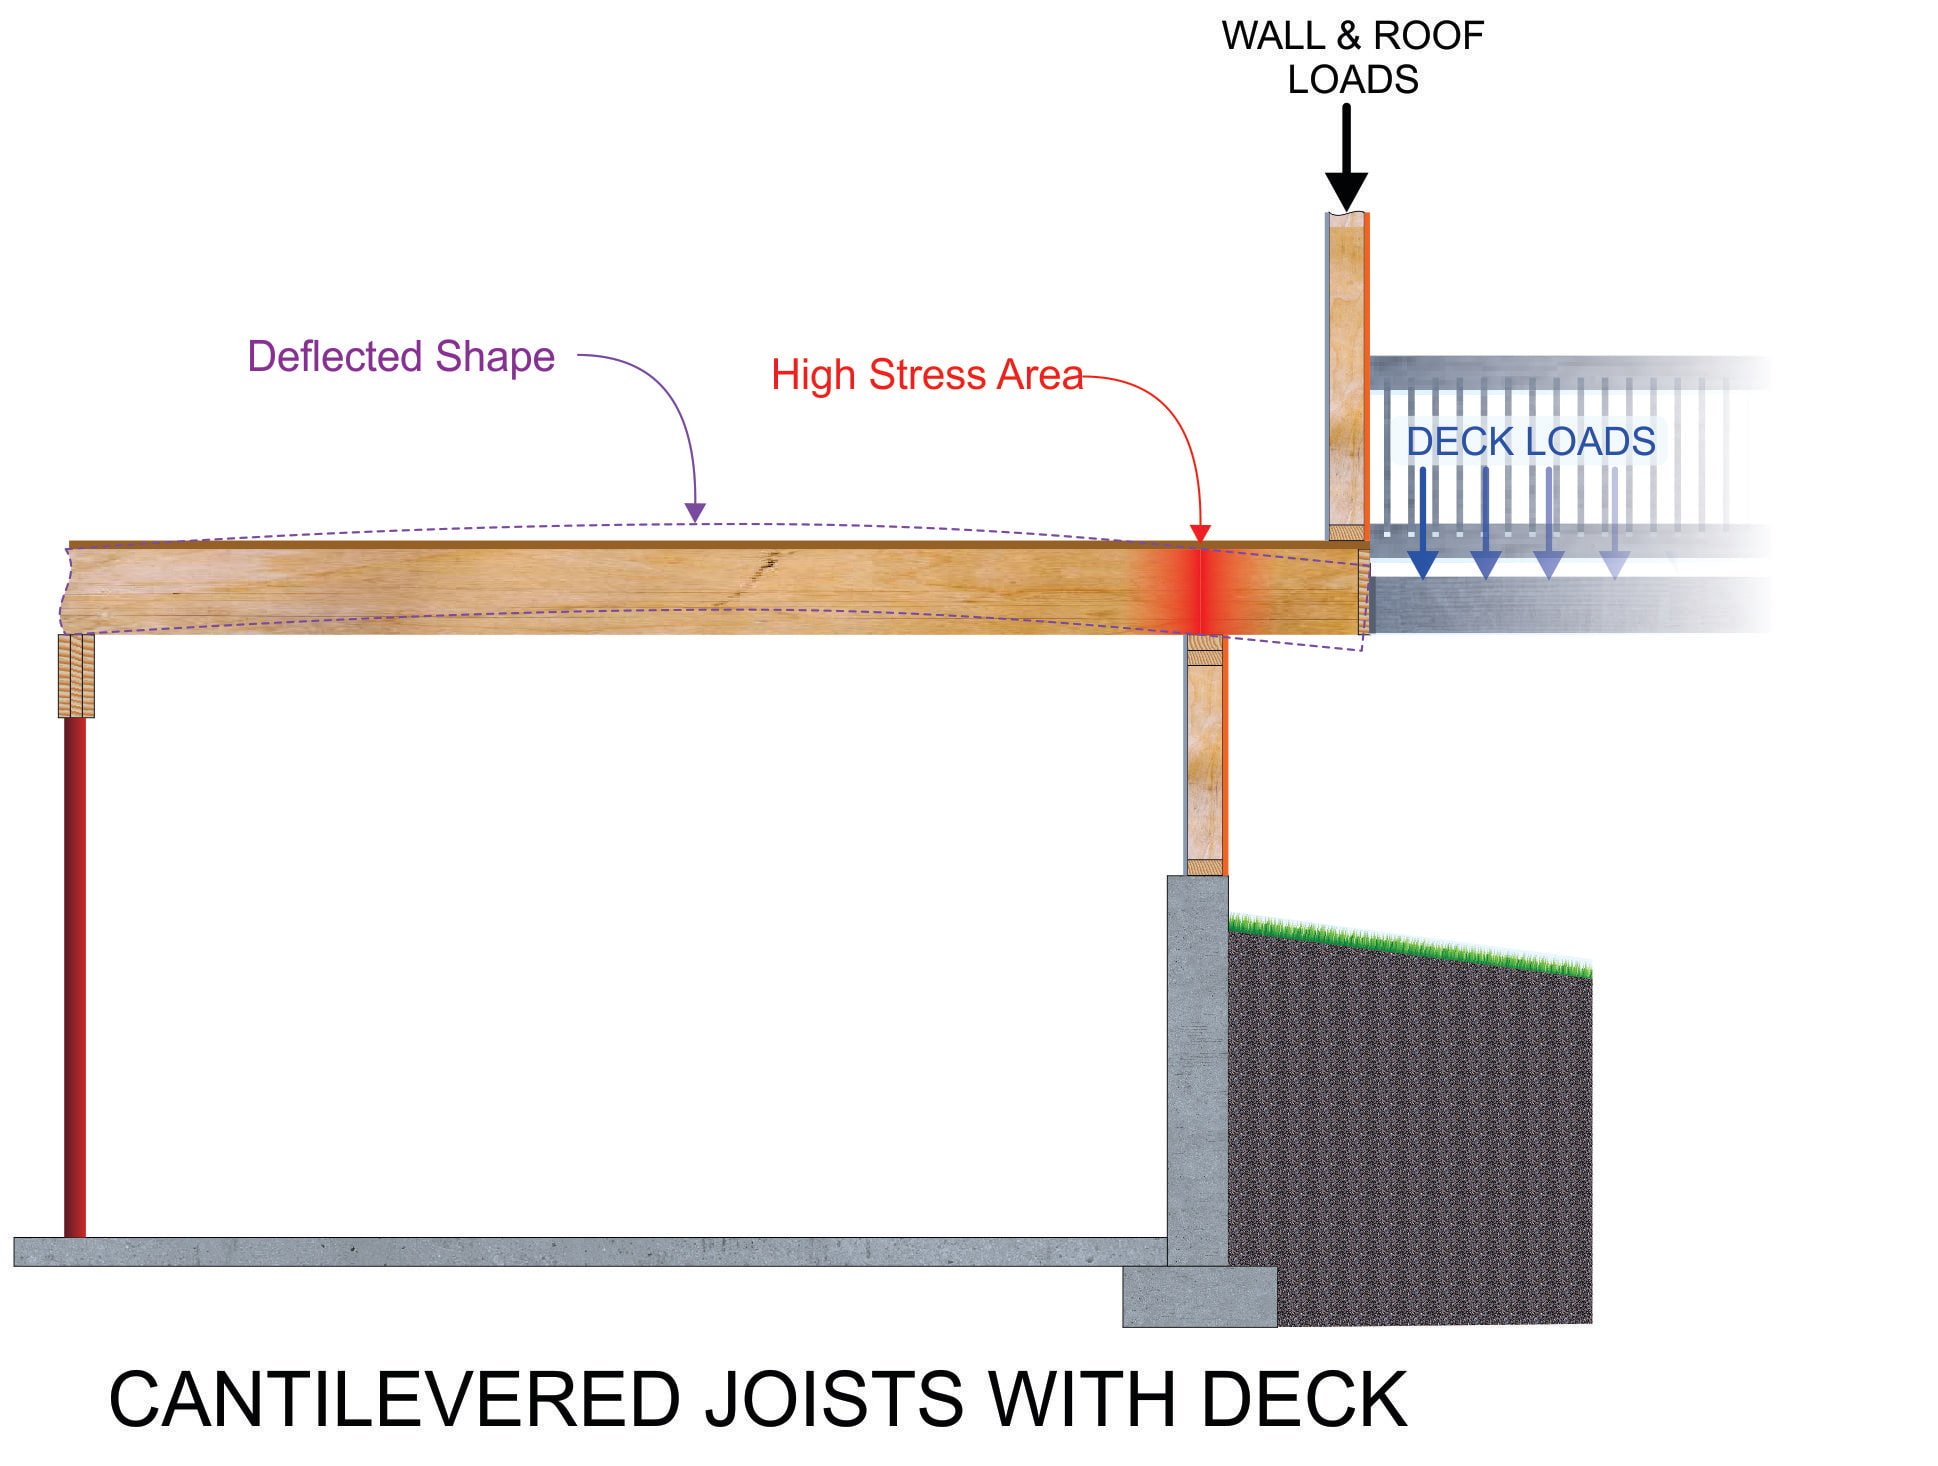 Cantilevered joists with deck.